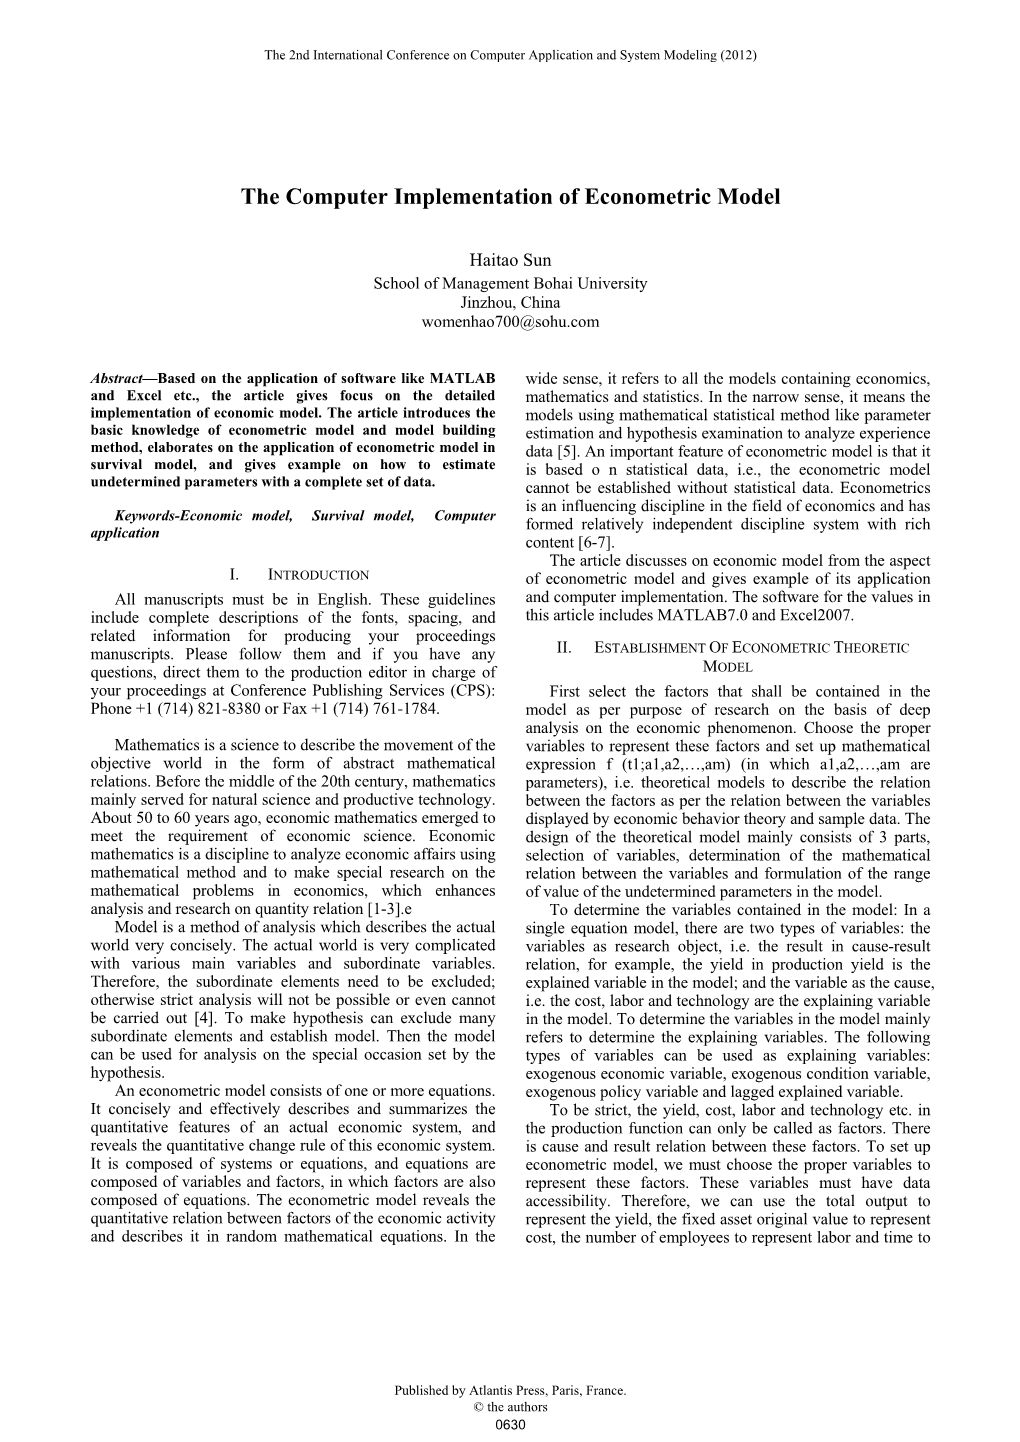 The Computer Implementation of Econometric Model